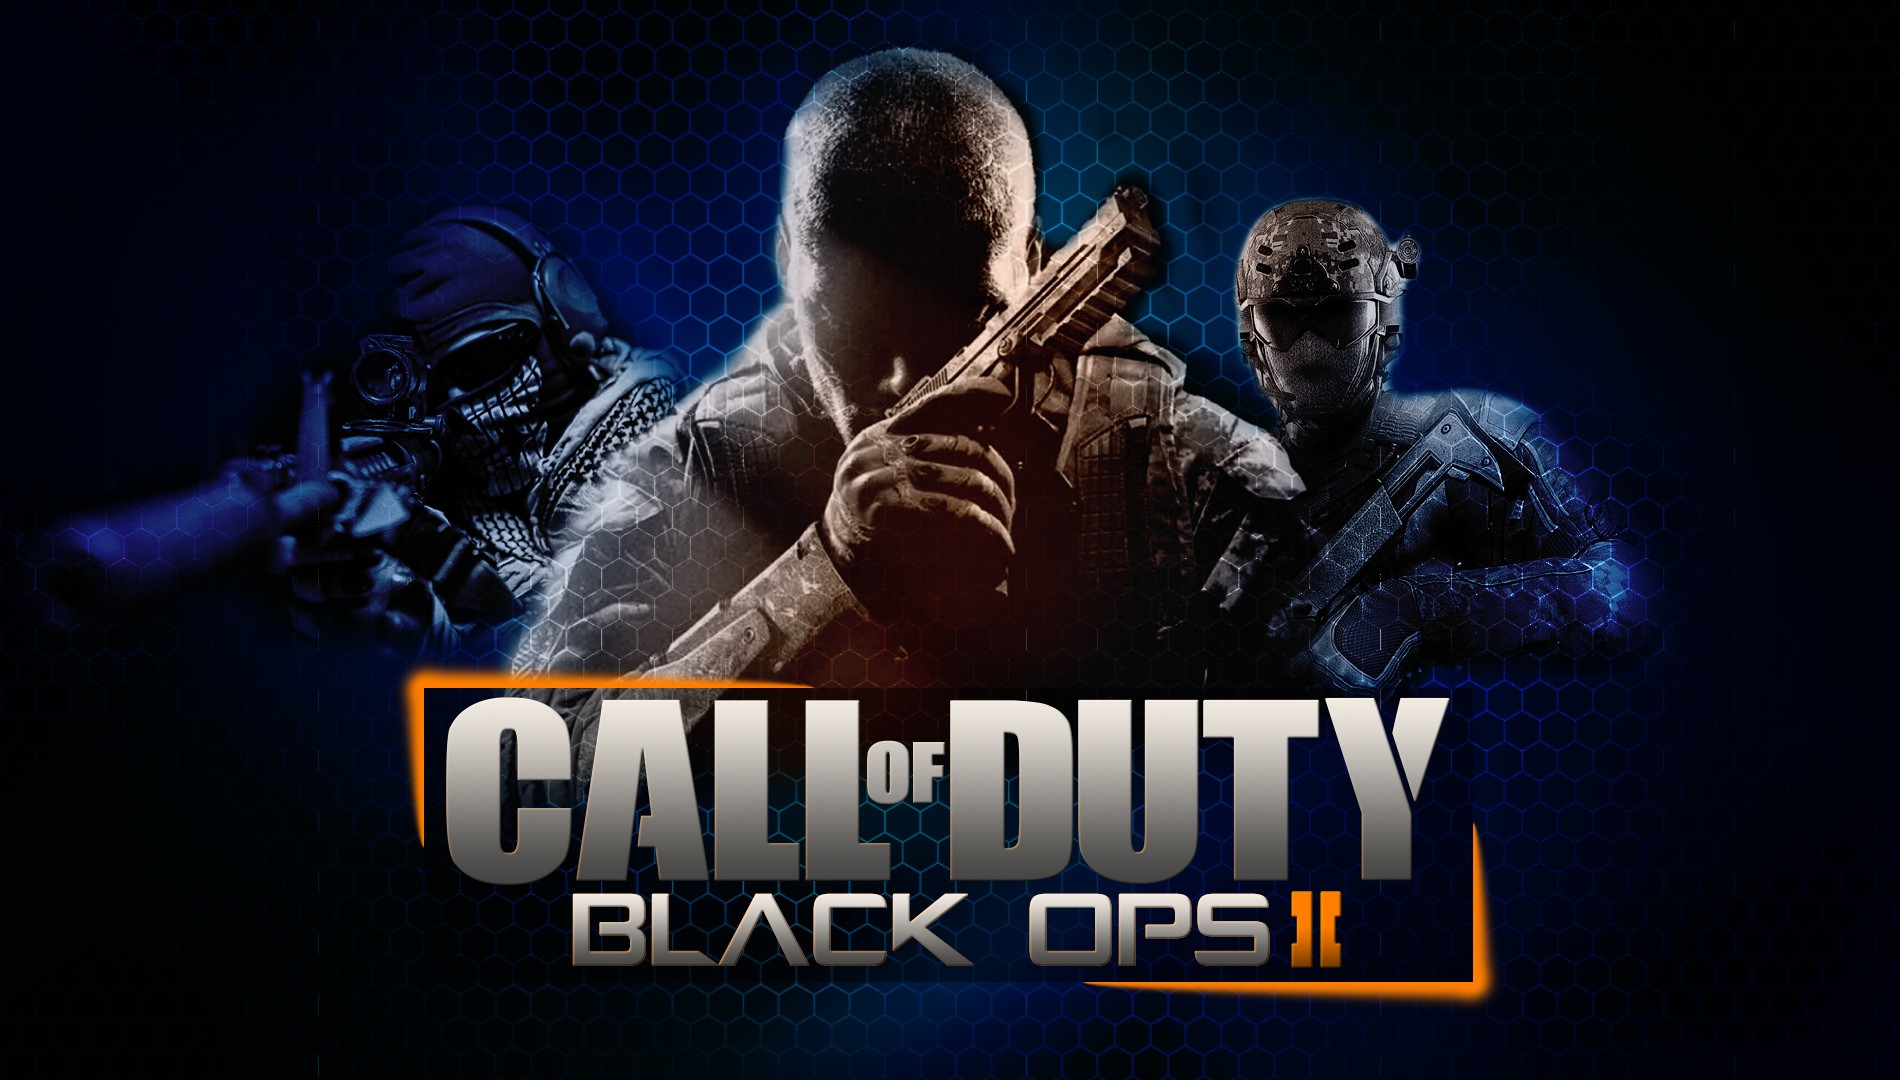 Gaming posters. Cod Black ops 2. Call of Duty Black ops 2 Постер. Call of Duty Black ops Постер. Call of Duty Блэк ОПС 2.